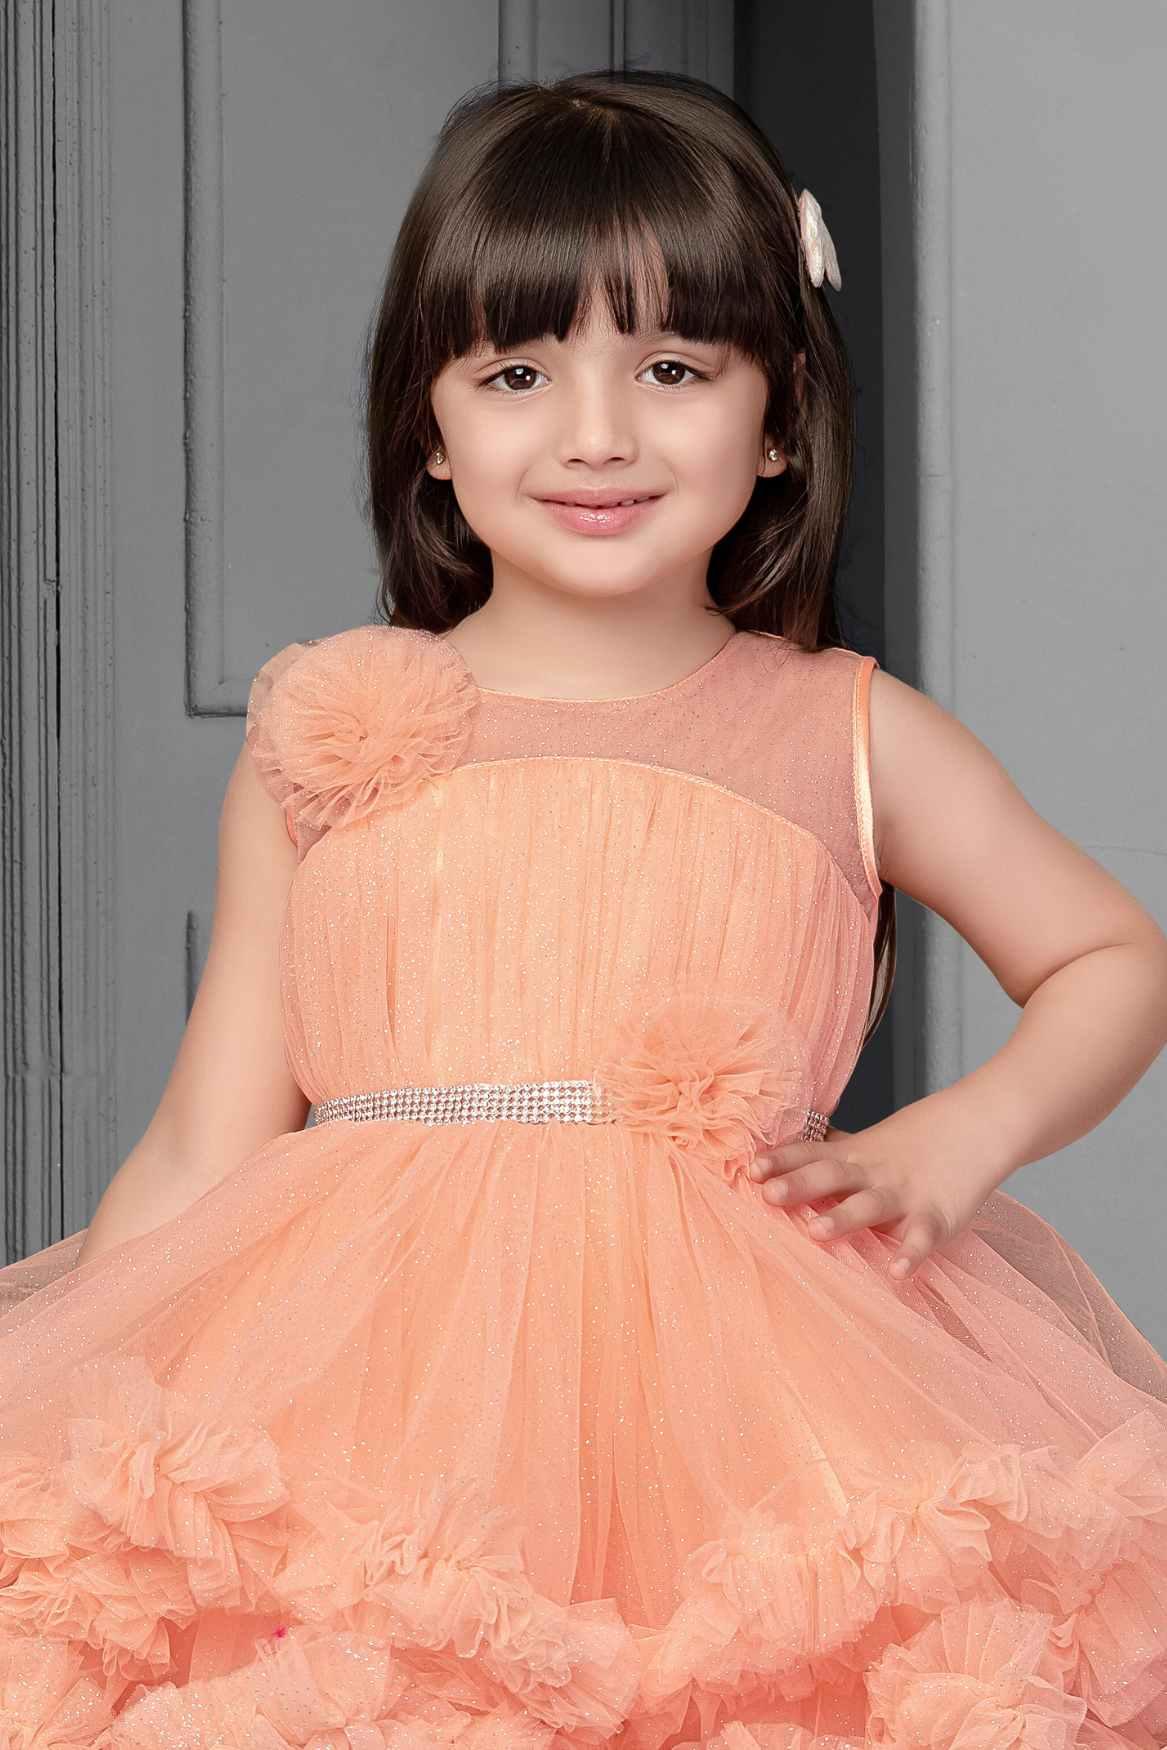 Peach Ruffle Frock With Floral Embellishment For Girls - Lagorii Kids